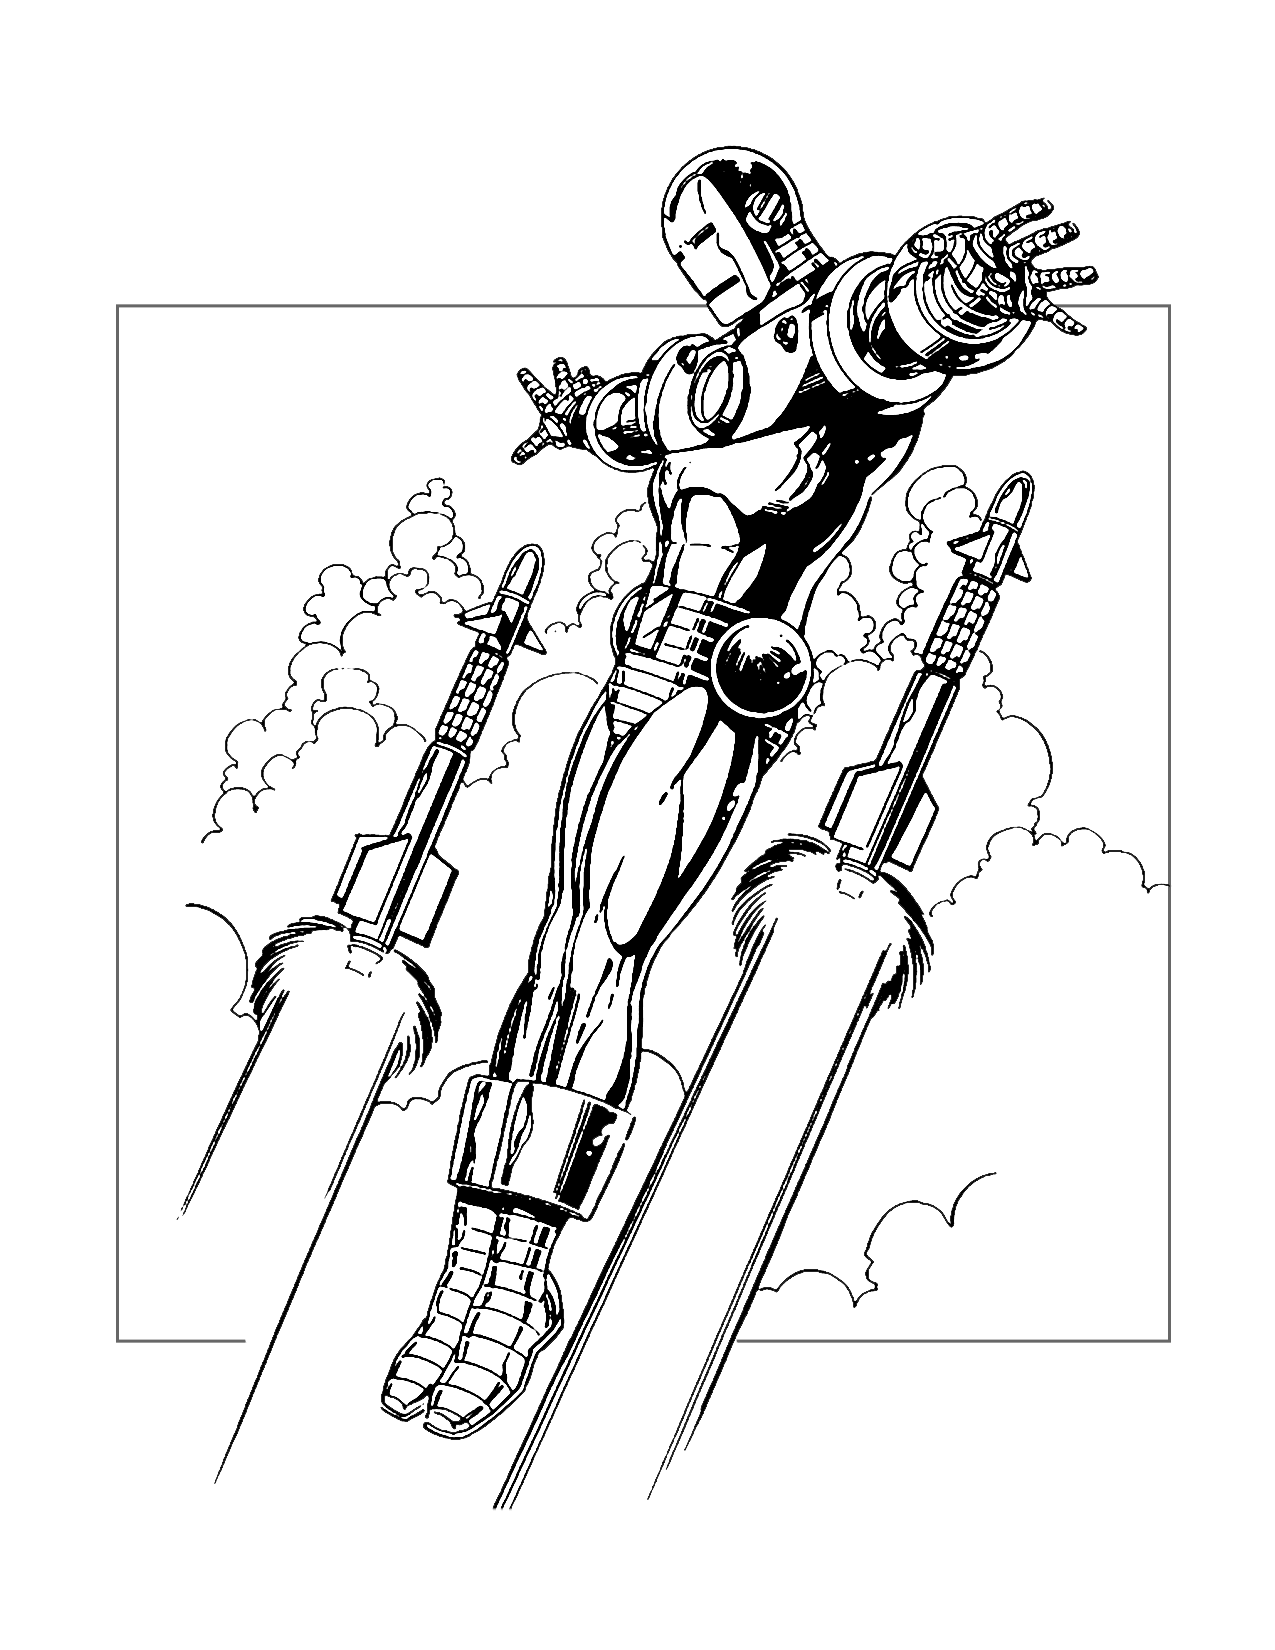 Iron Man Flys With Missiles Coloring Page